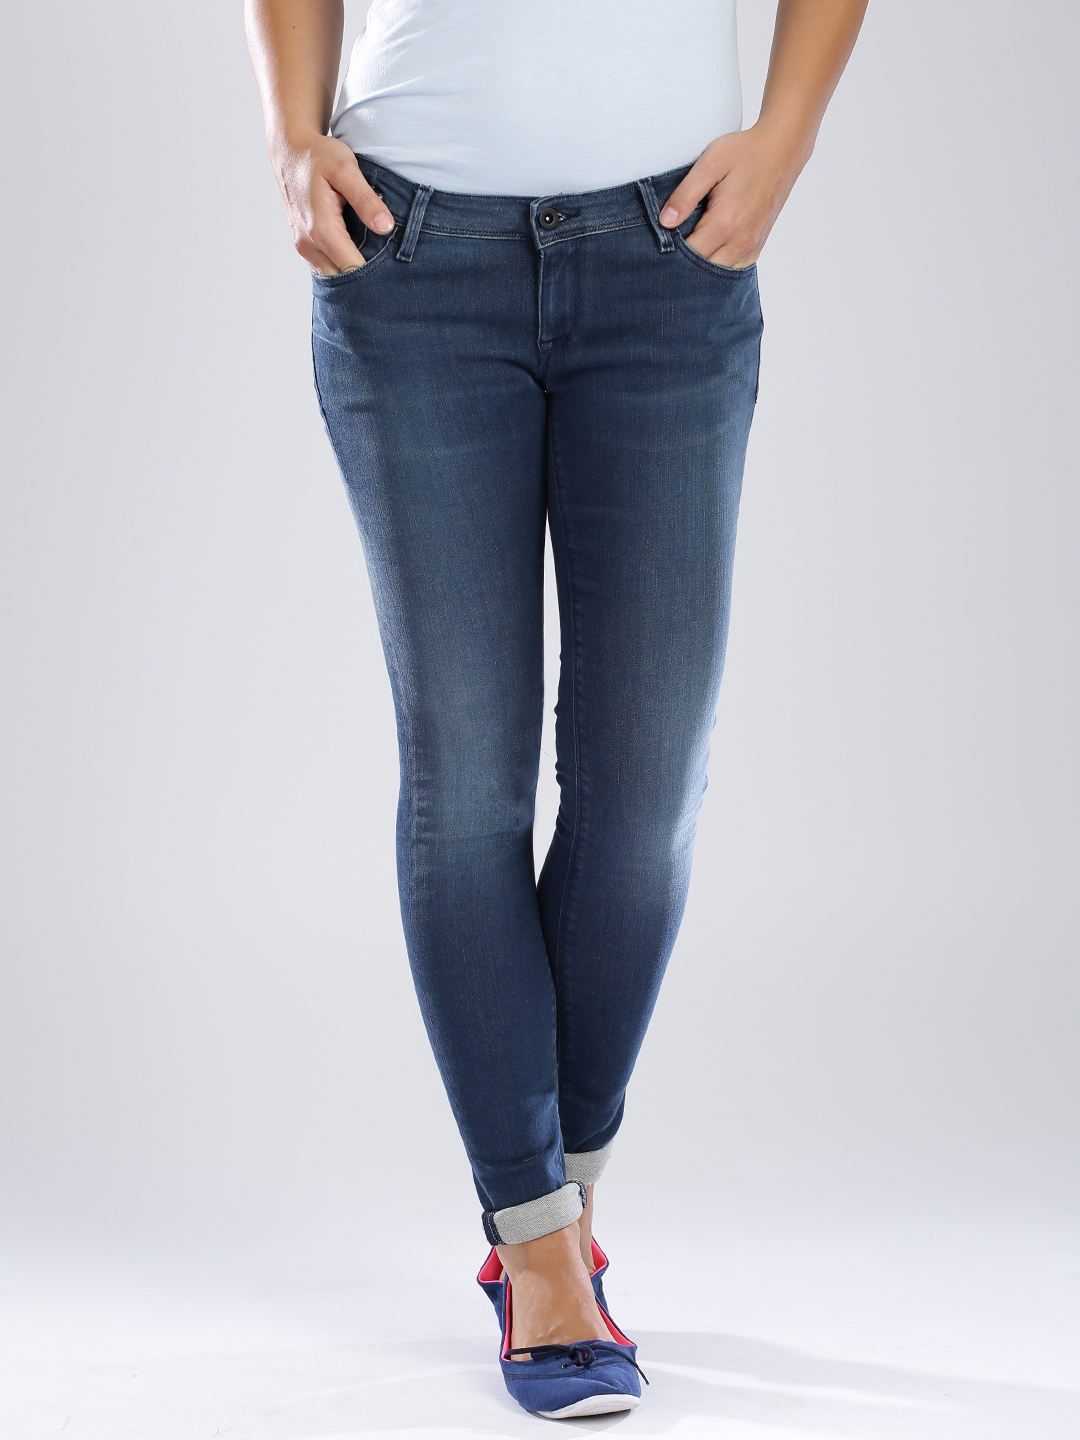 Illusion mixer Distraktion Buy Tommy Hilfiger Navy Natalie Skinny Jeans - Jeans for Women 1207676 |  Myntra